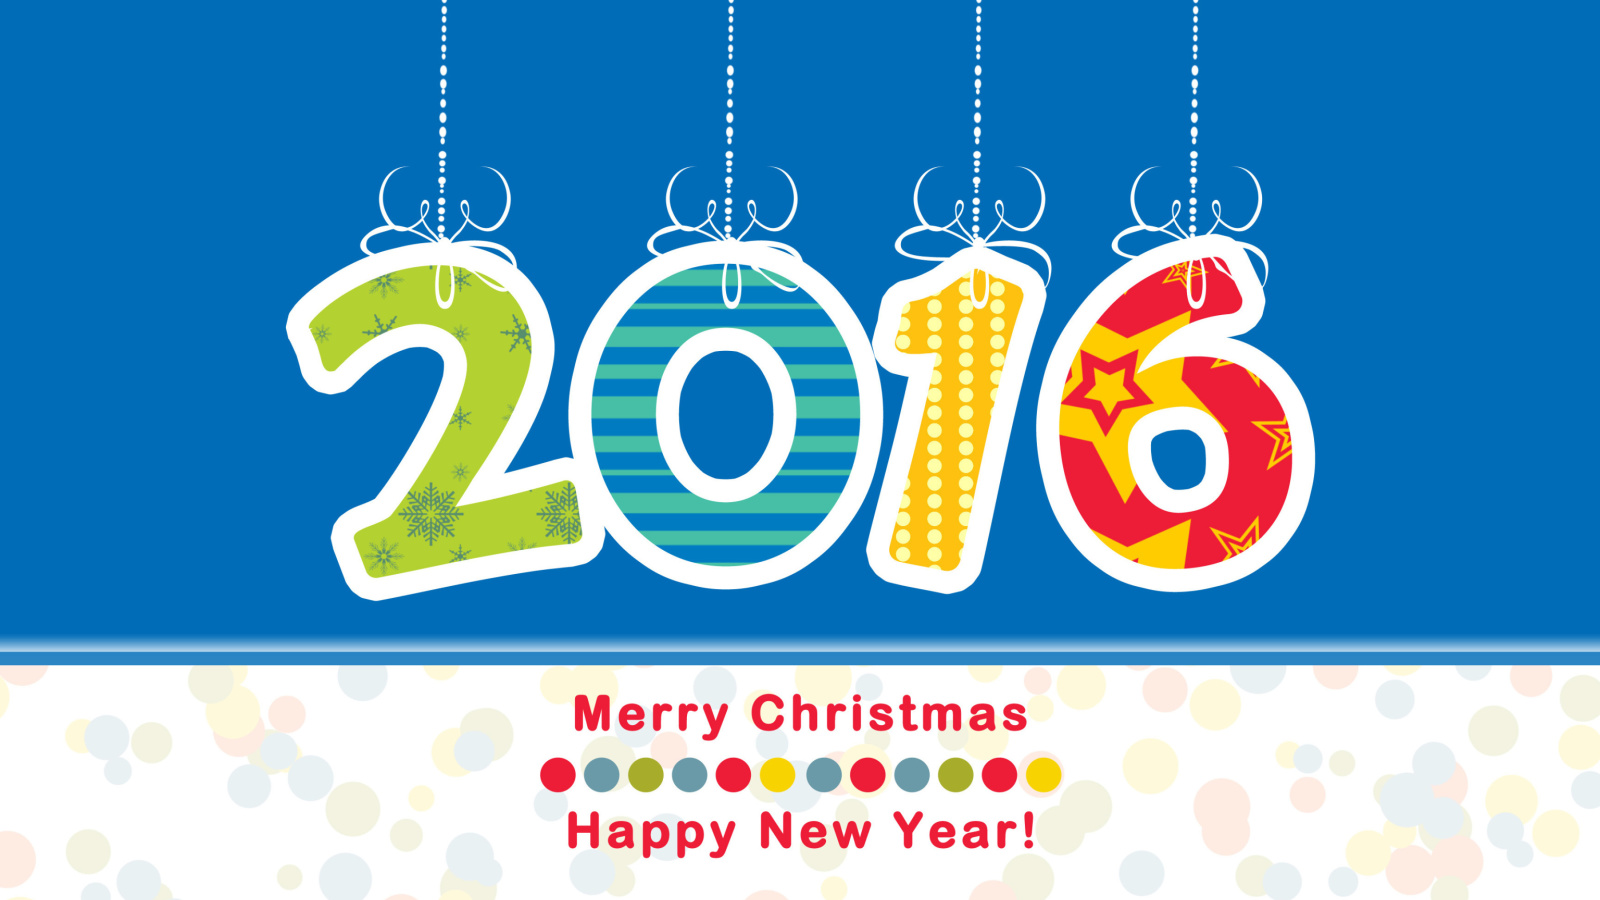 Das Colorful New Year 2016 Greetings Wallpaper 1600x900